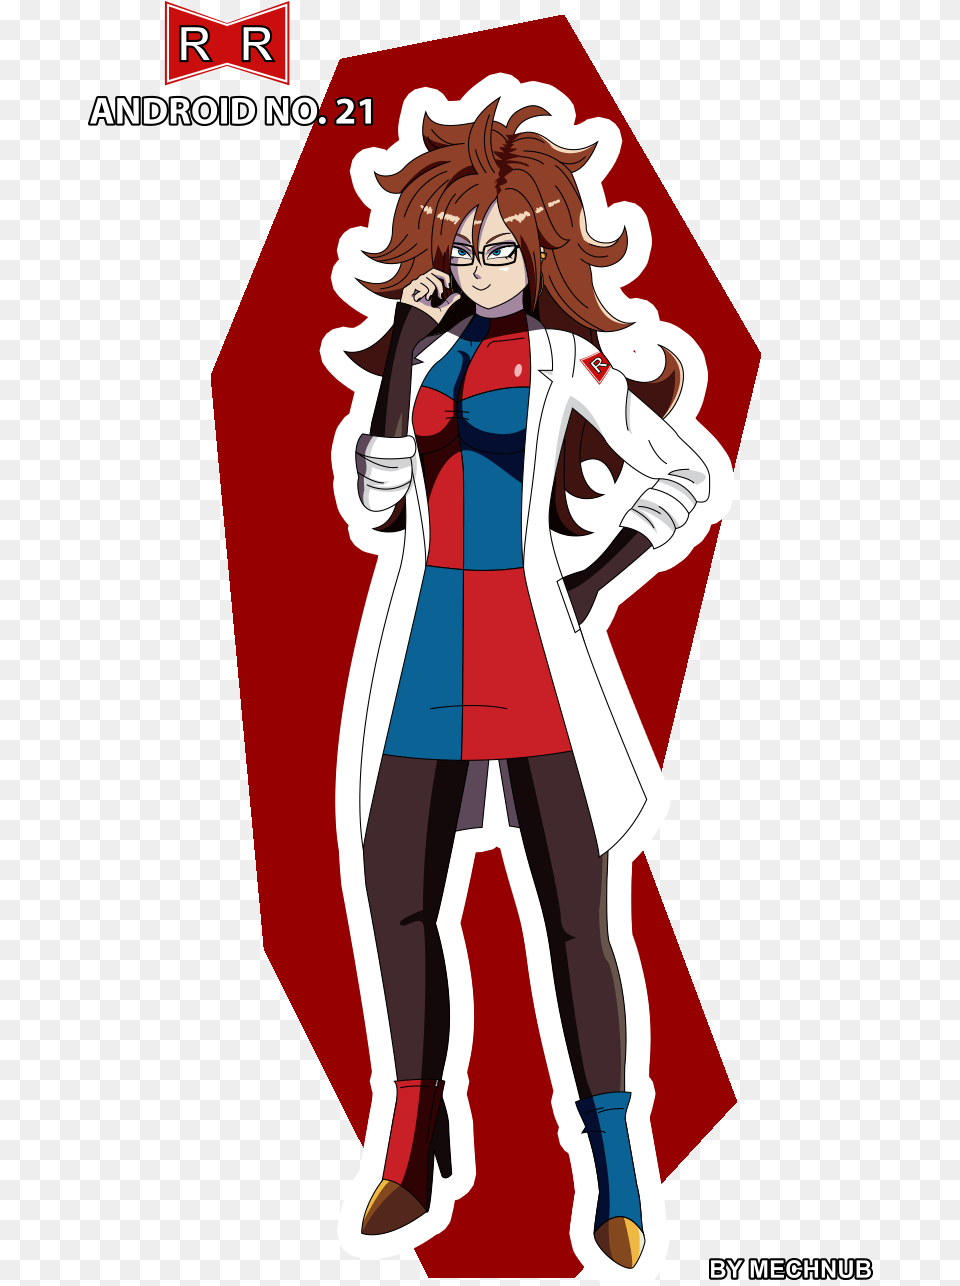 The Last Android 21 Drawing For Now Illustration, Book, Clothing, Coat, Comics Png